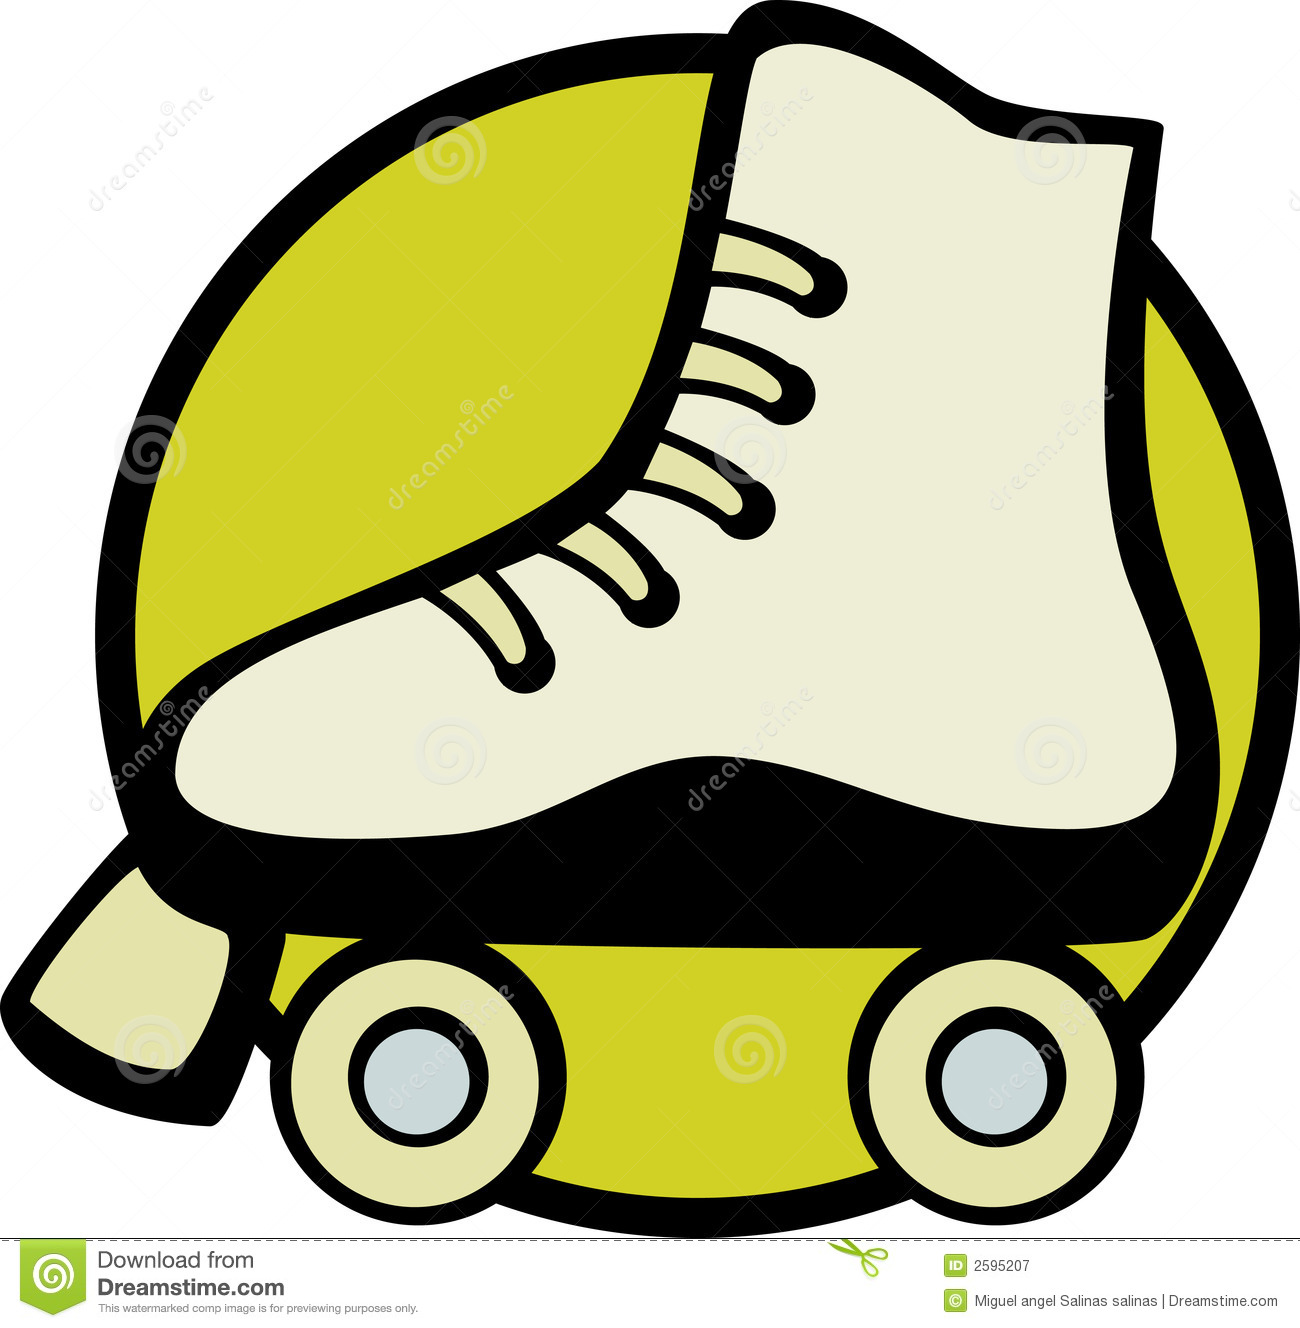 Roller skate vector illustration Royalty Free Stock Photography